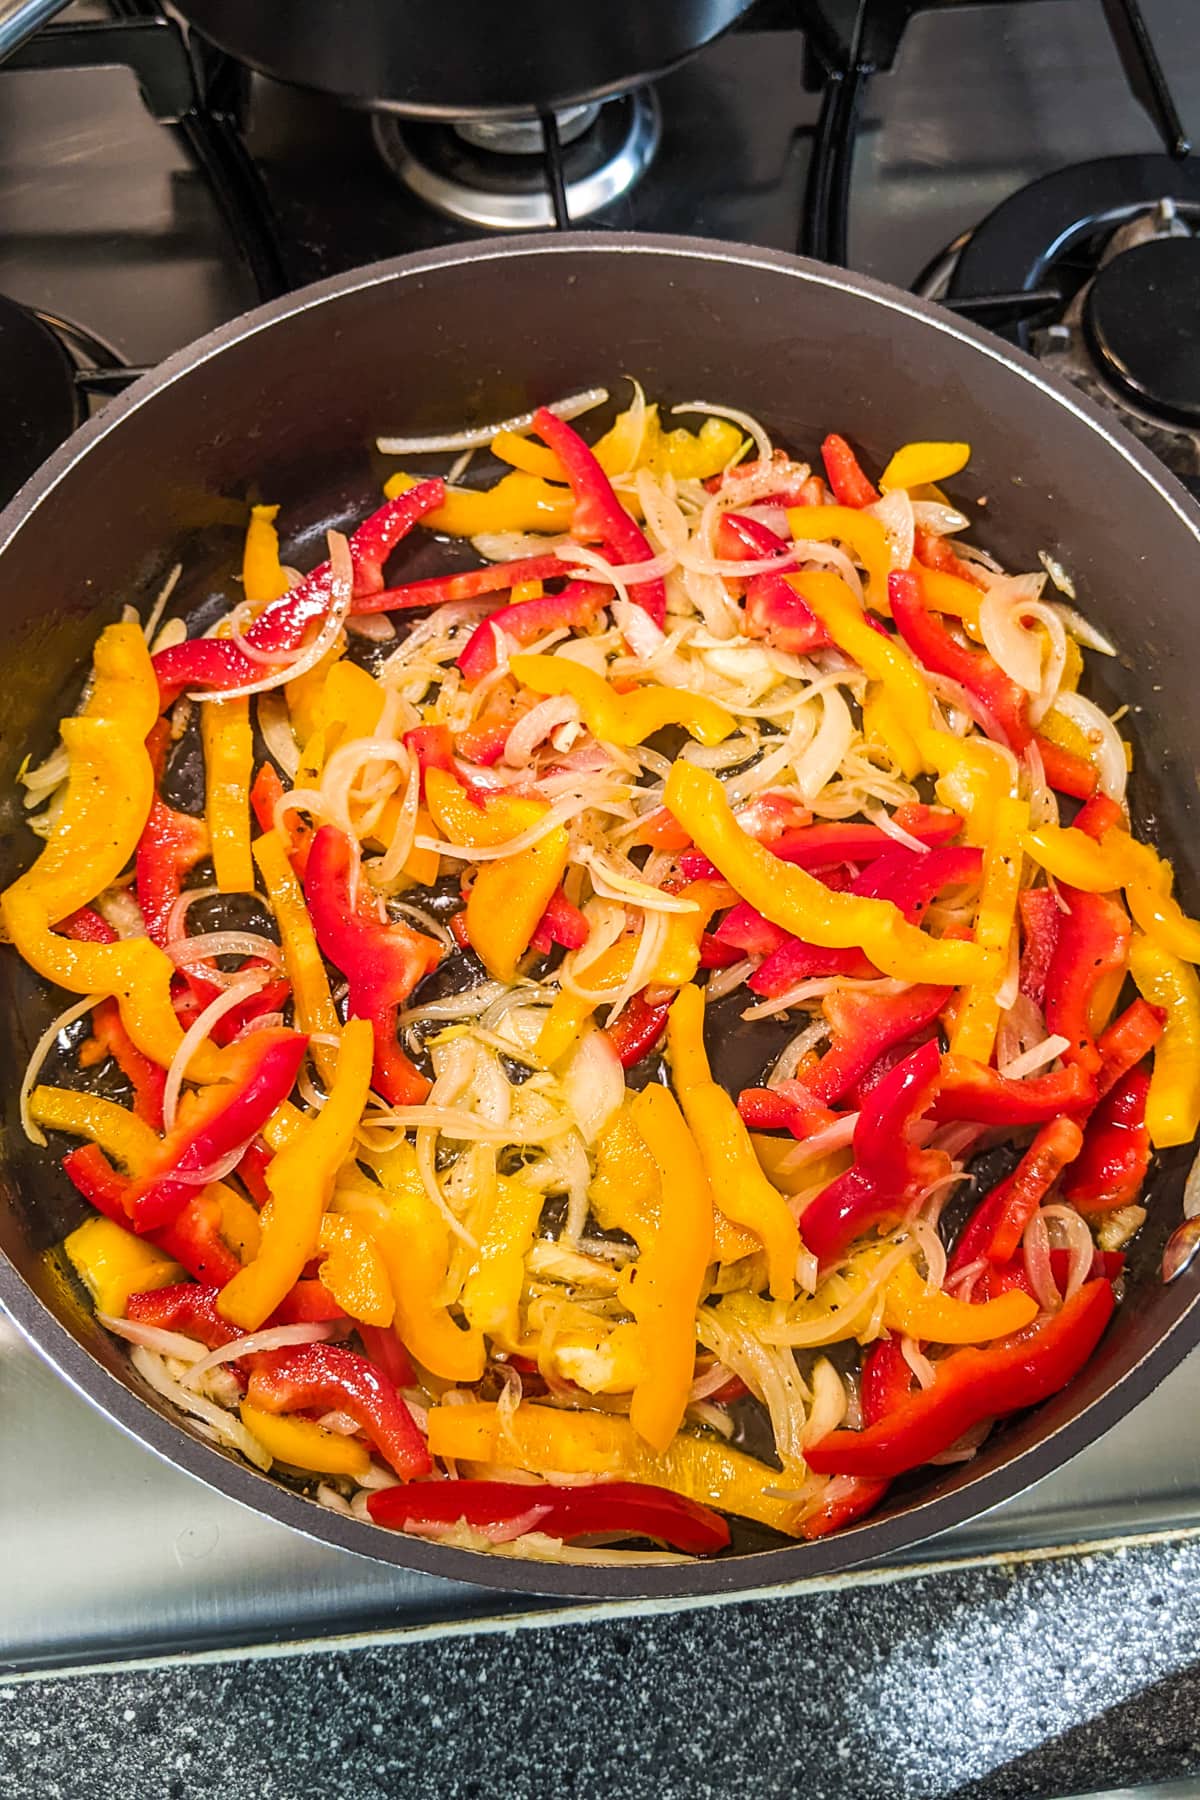 Frying onions with sliced bell peppers on the stove.